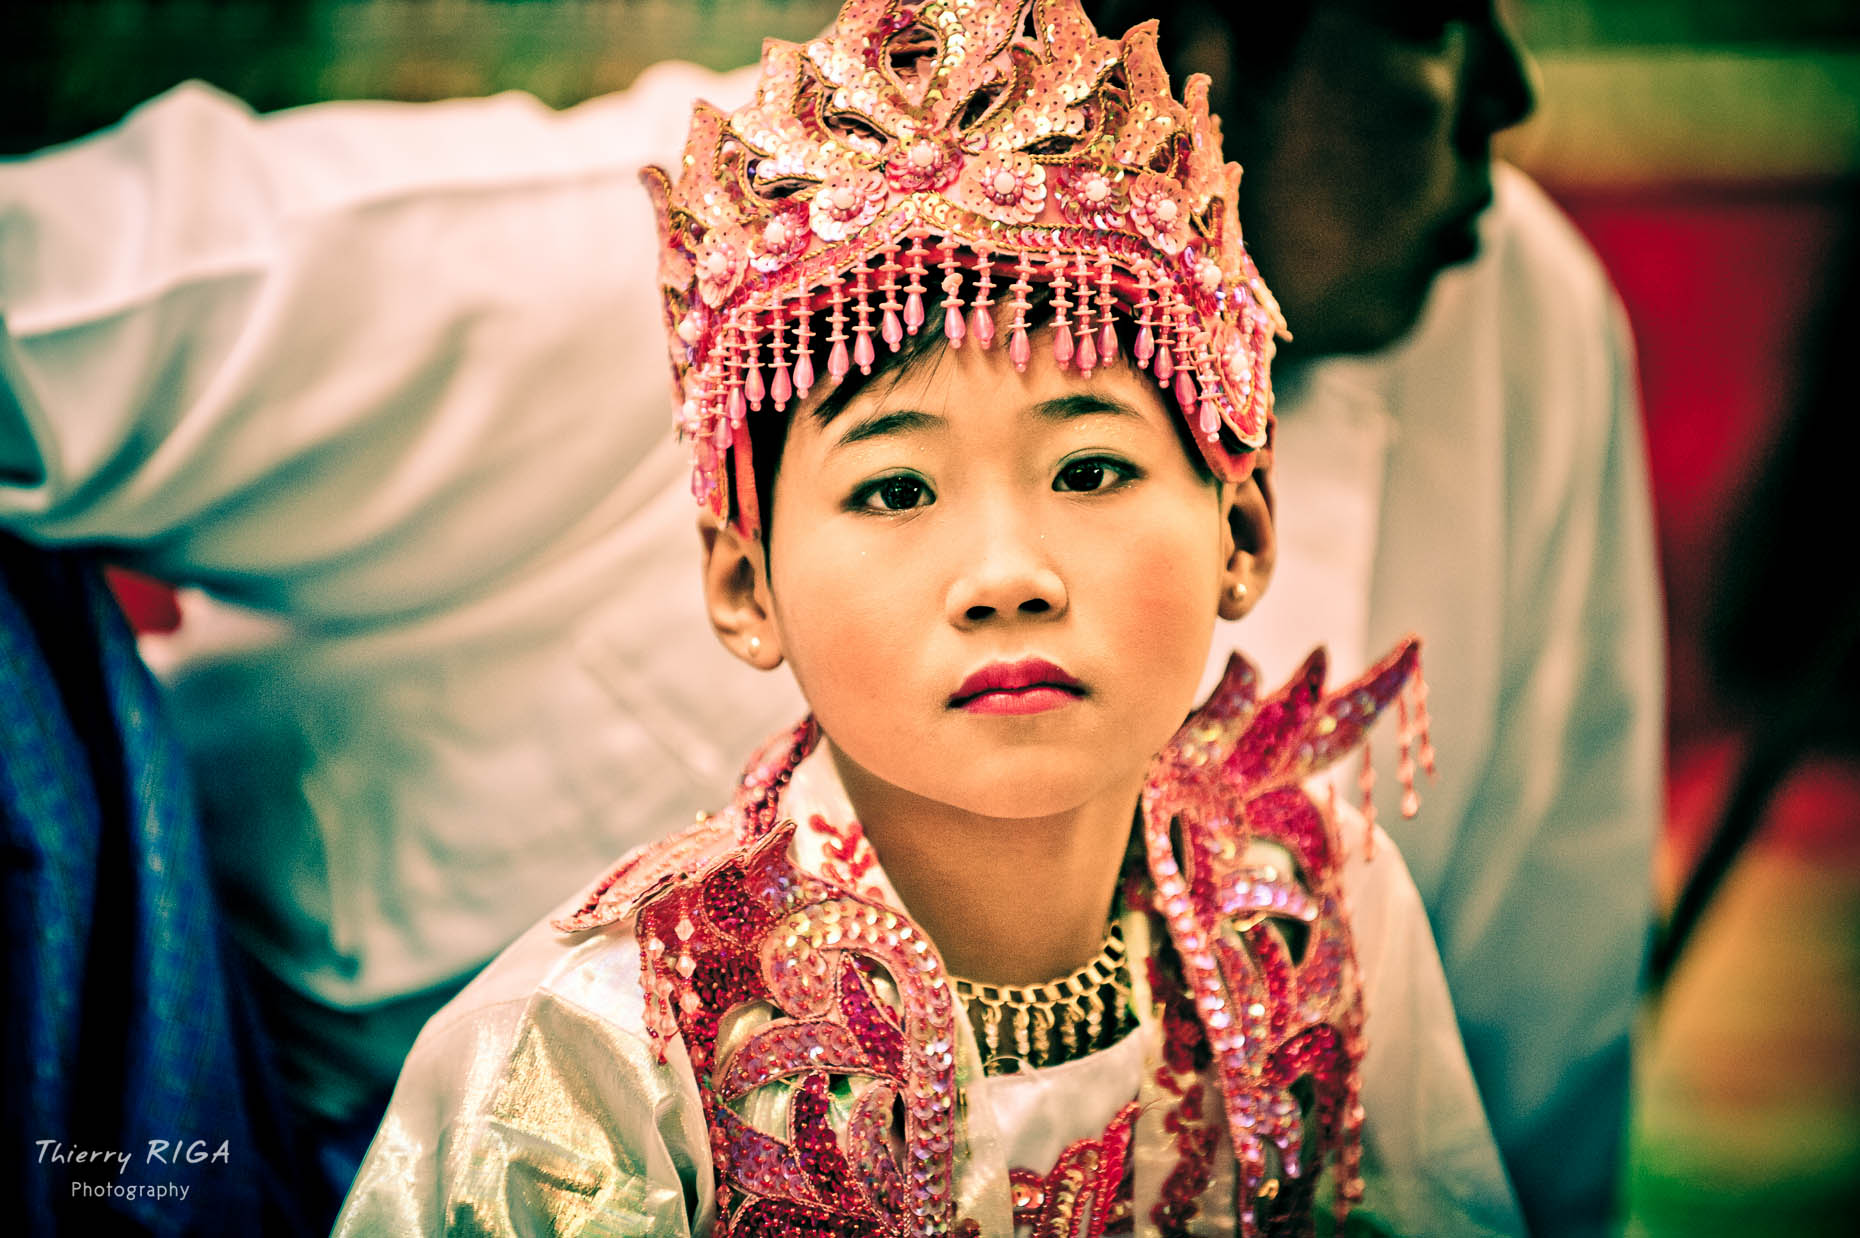 Buddhist novice portrait with pink crown during ordination ceremony, Bagan, Myanmar